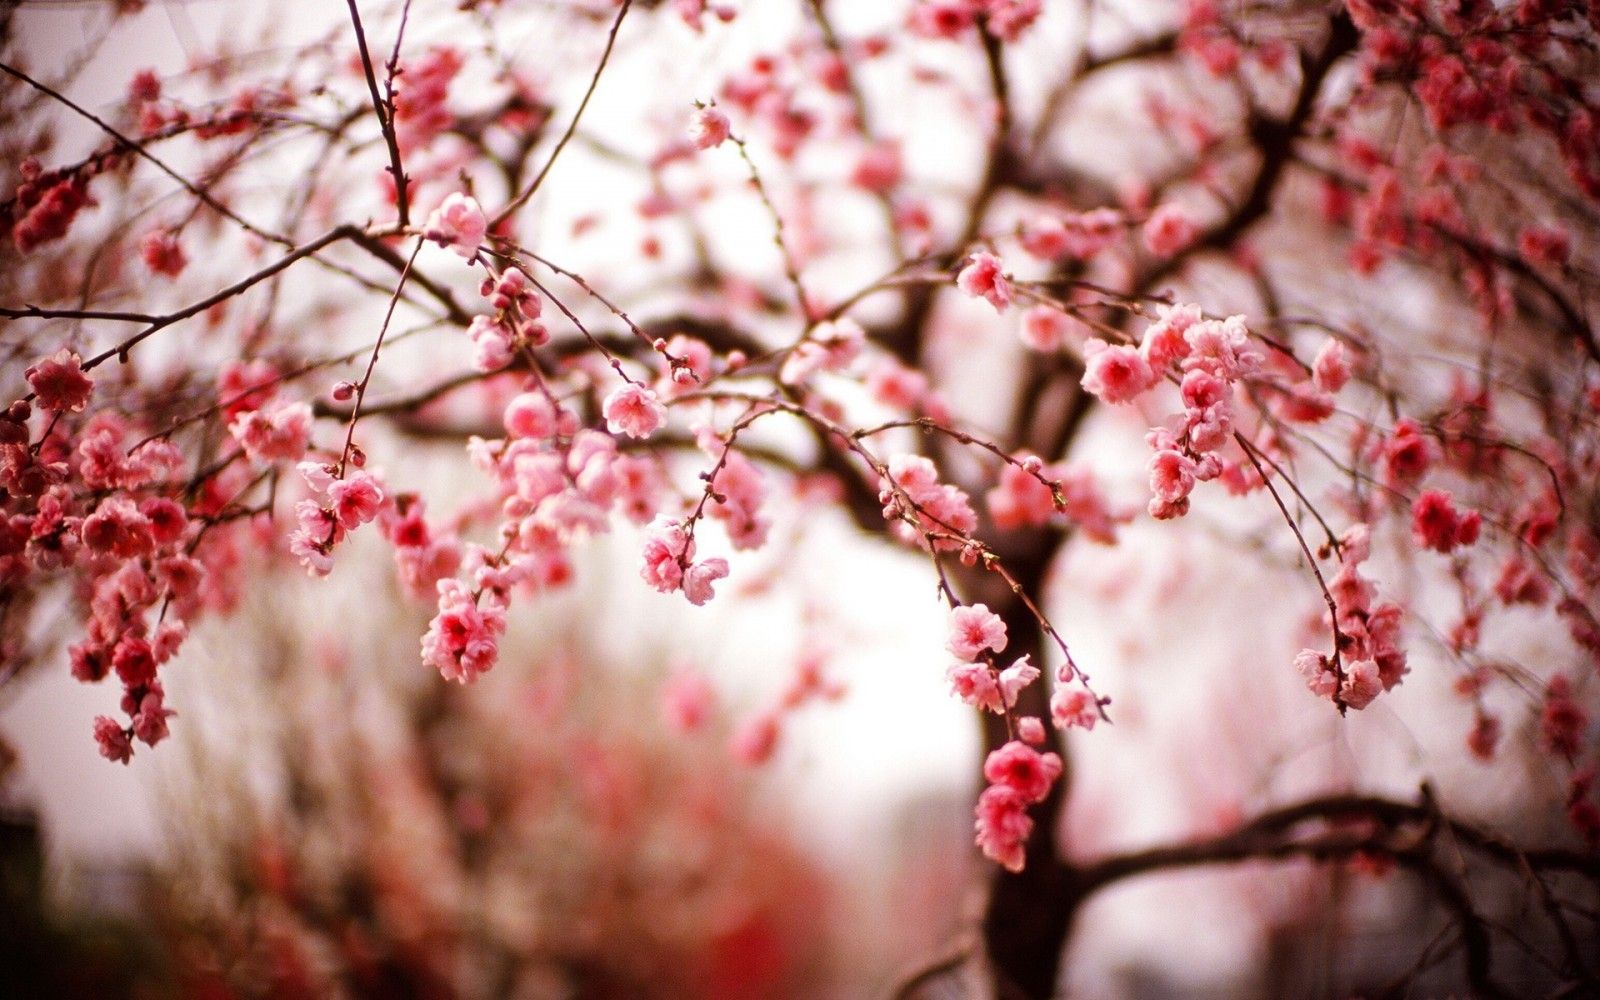 Wallpaper, trees, food, red, branch, cherry blossom, pink, spring, tree, leaf, flower, plant, season, petal, produce, close up, macro photography 1920x1200